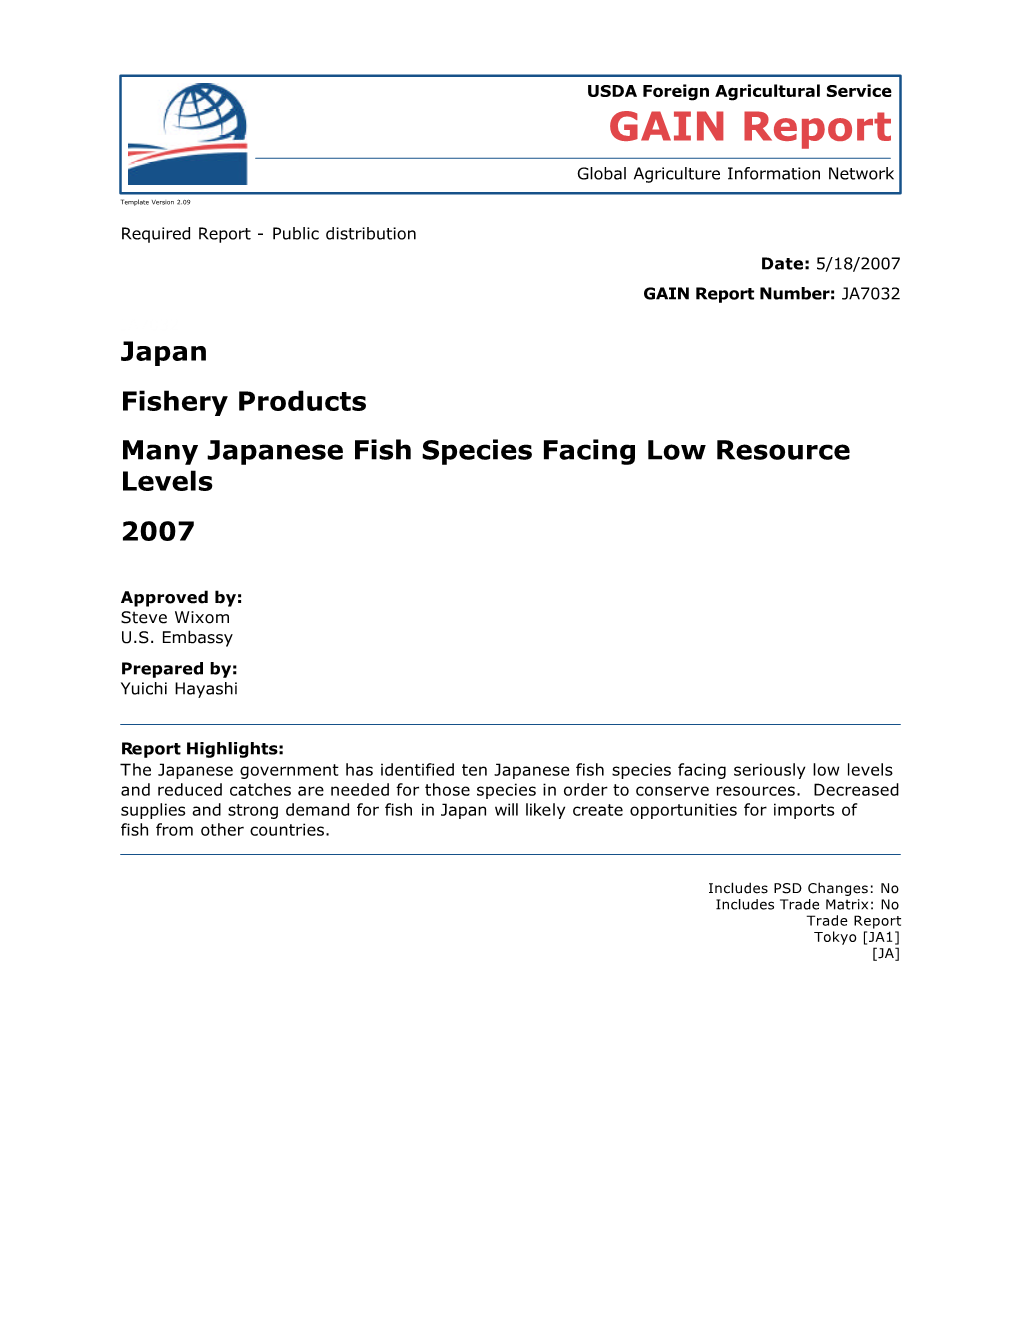 Japan Fishery Products Many Japanese Fish Species Facing Low Resource Levels 2007